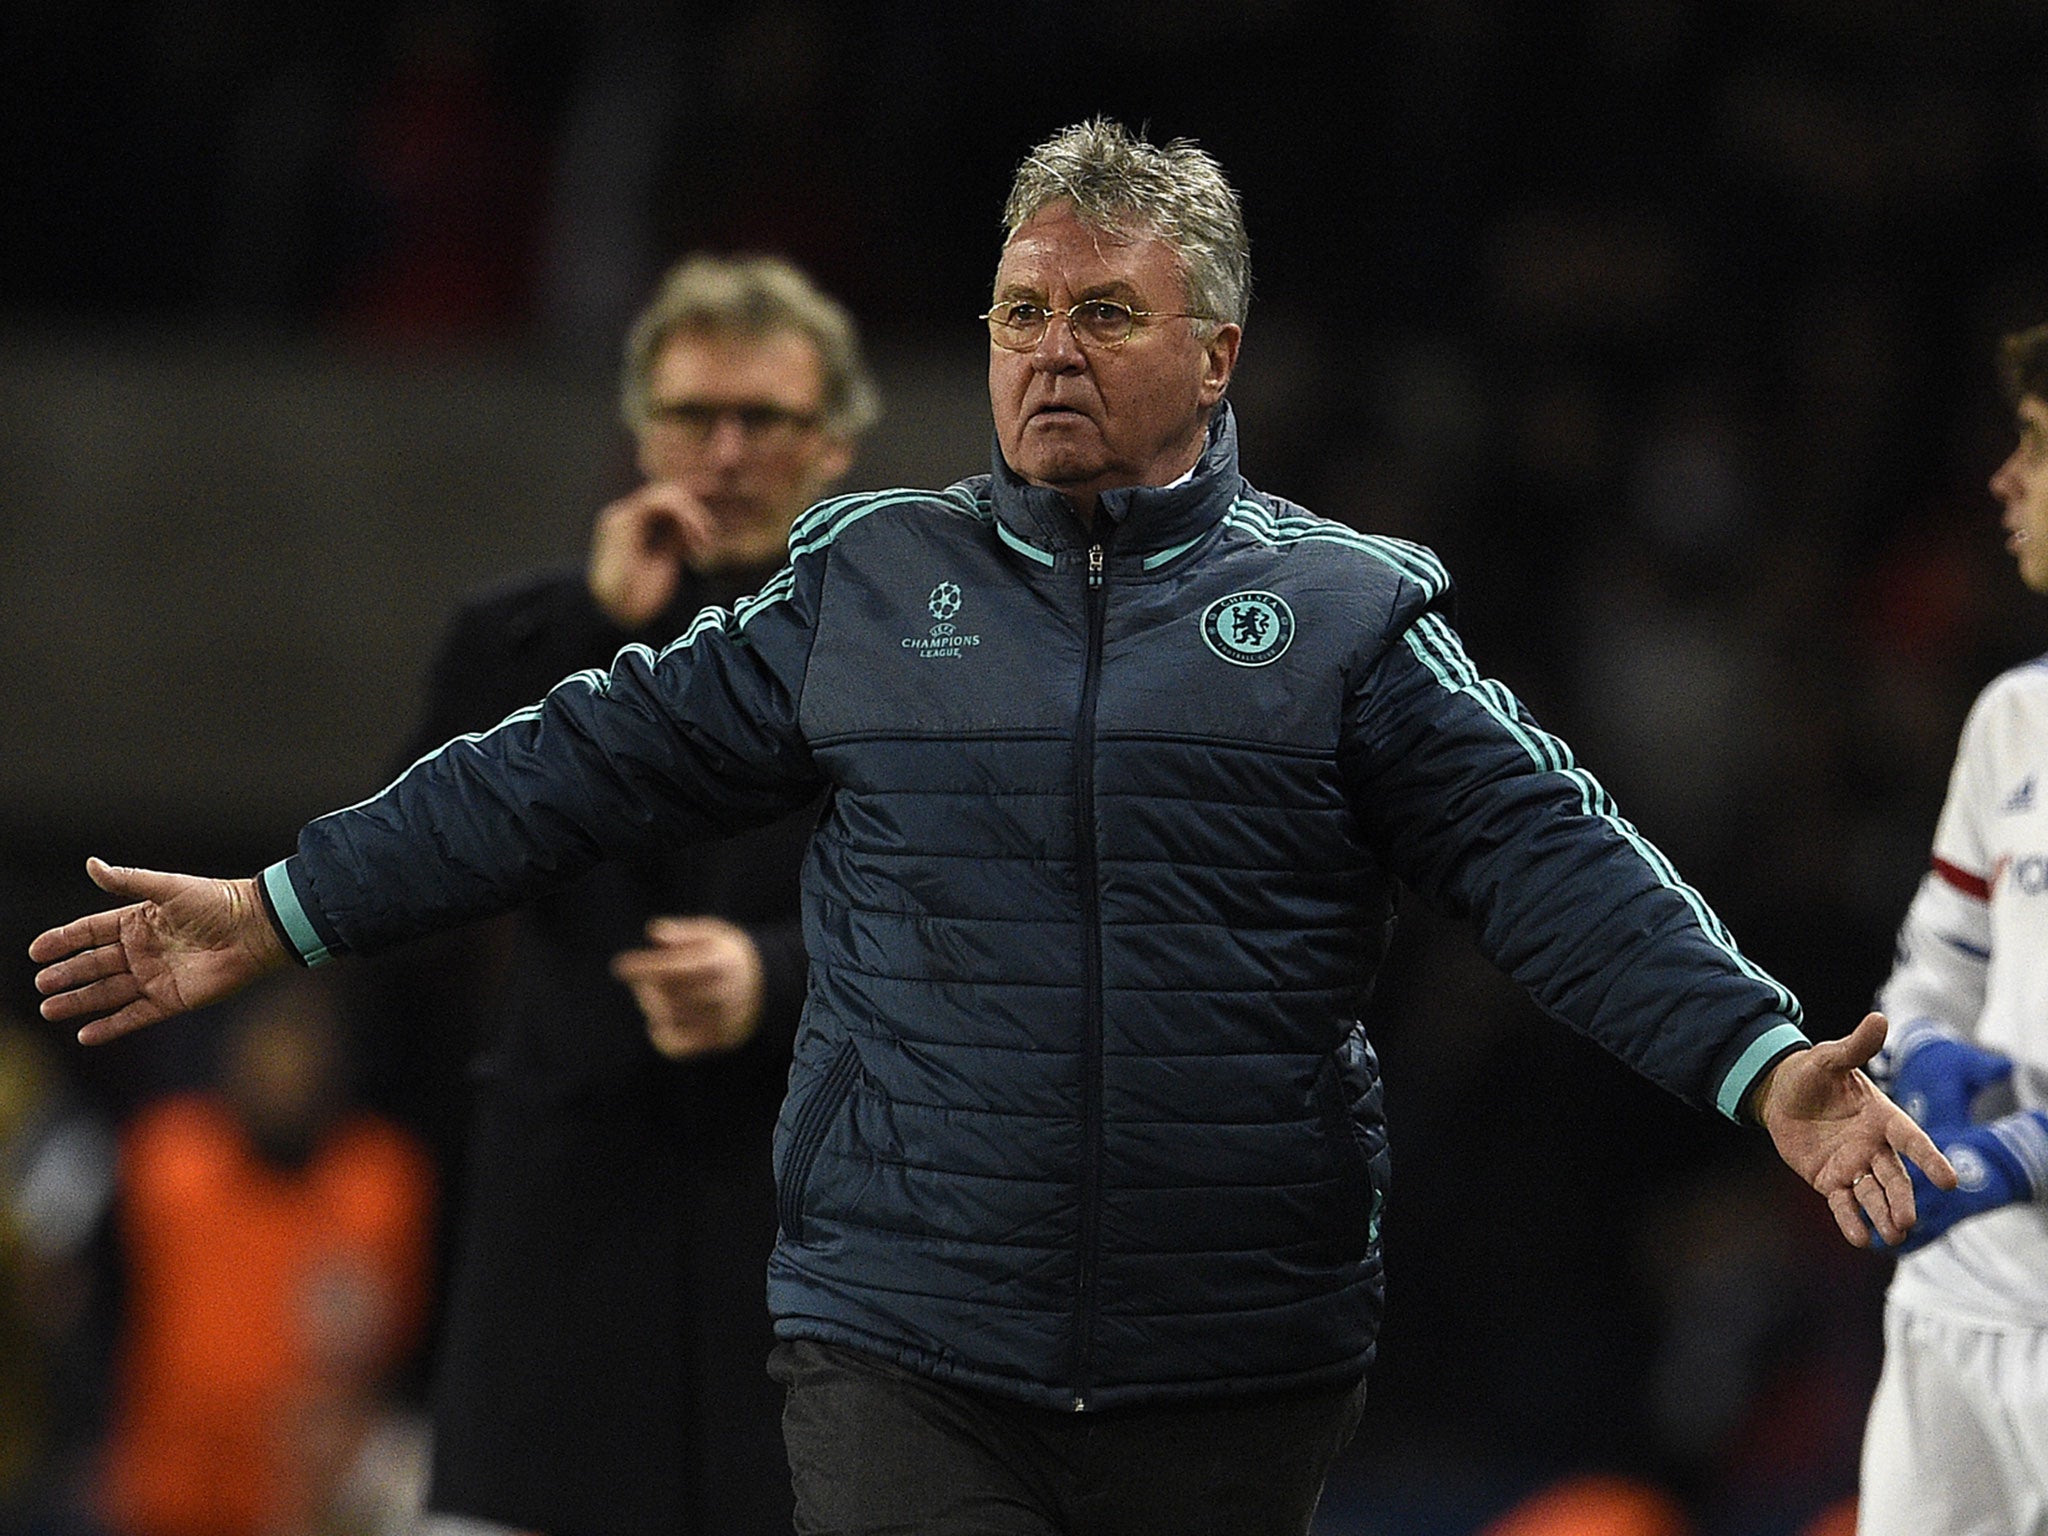 Guus Hiddink remonstrates on the sidelines during Chelsea's 2-1 loss to PSG